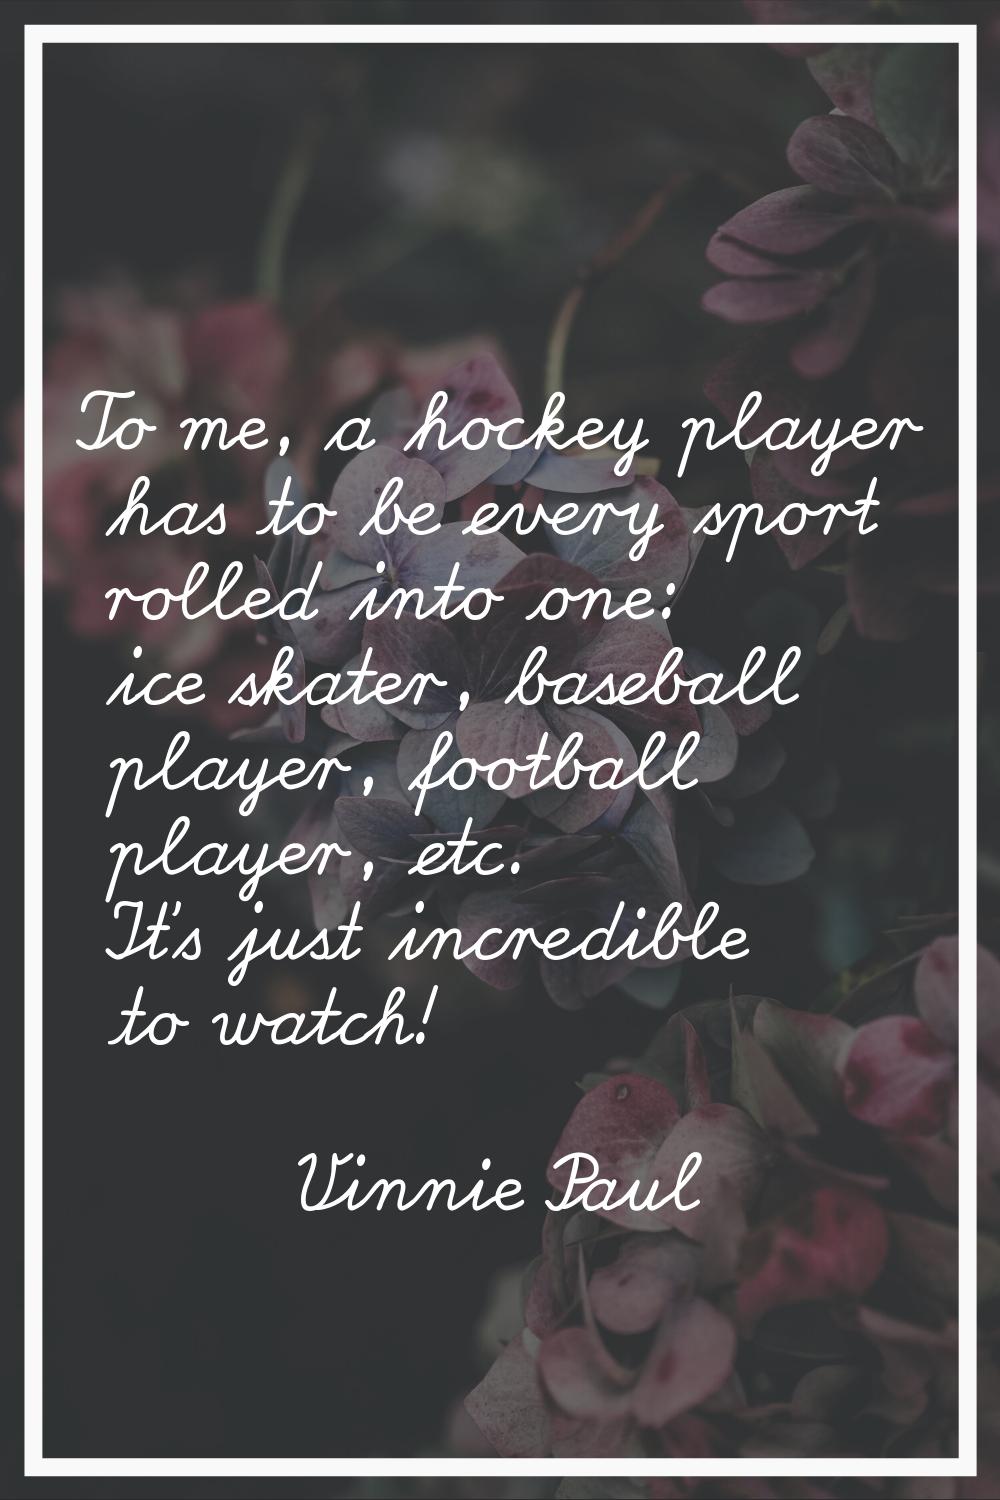 To me, a hockey player has to be every sport rolled into one: ice skater, baseball player, football